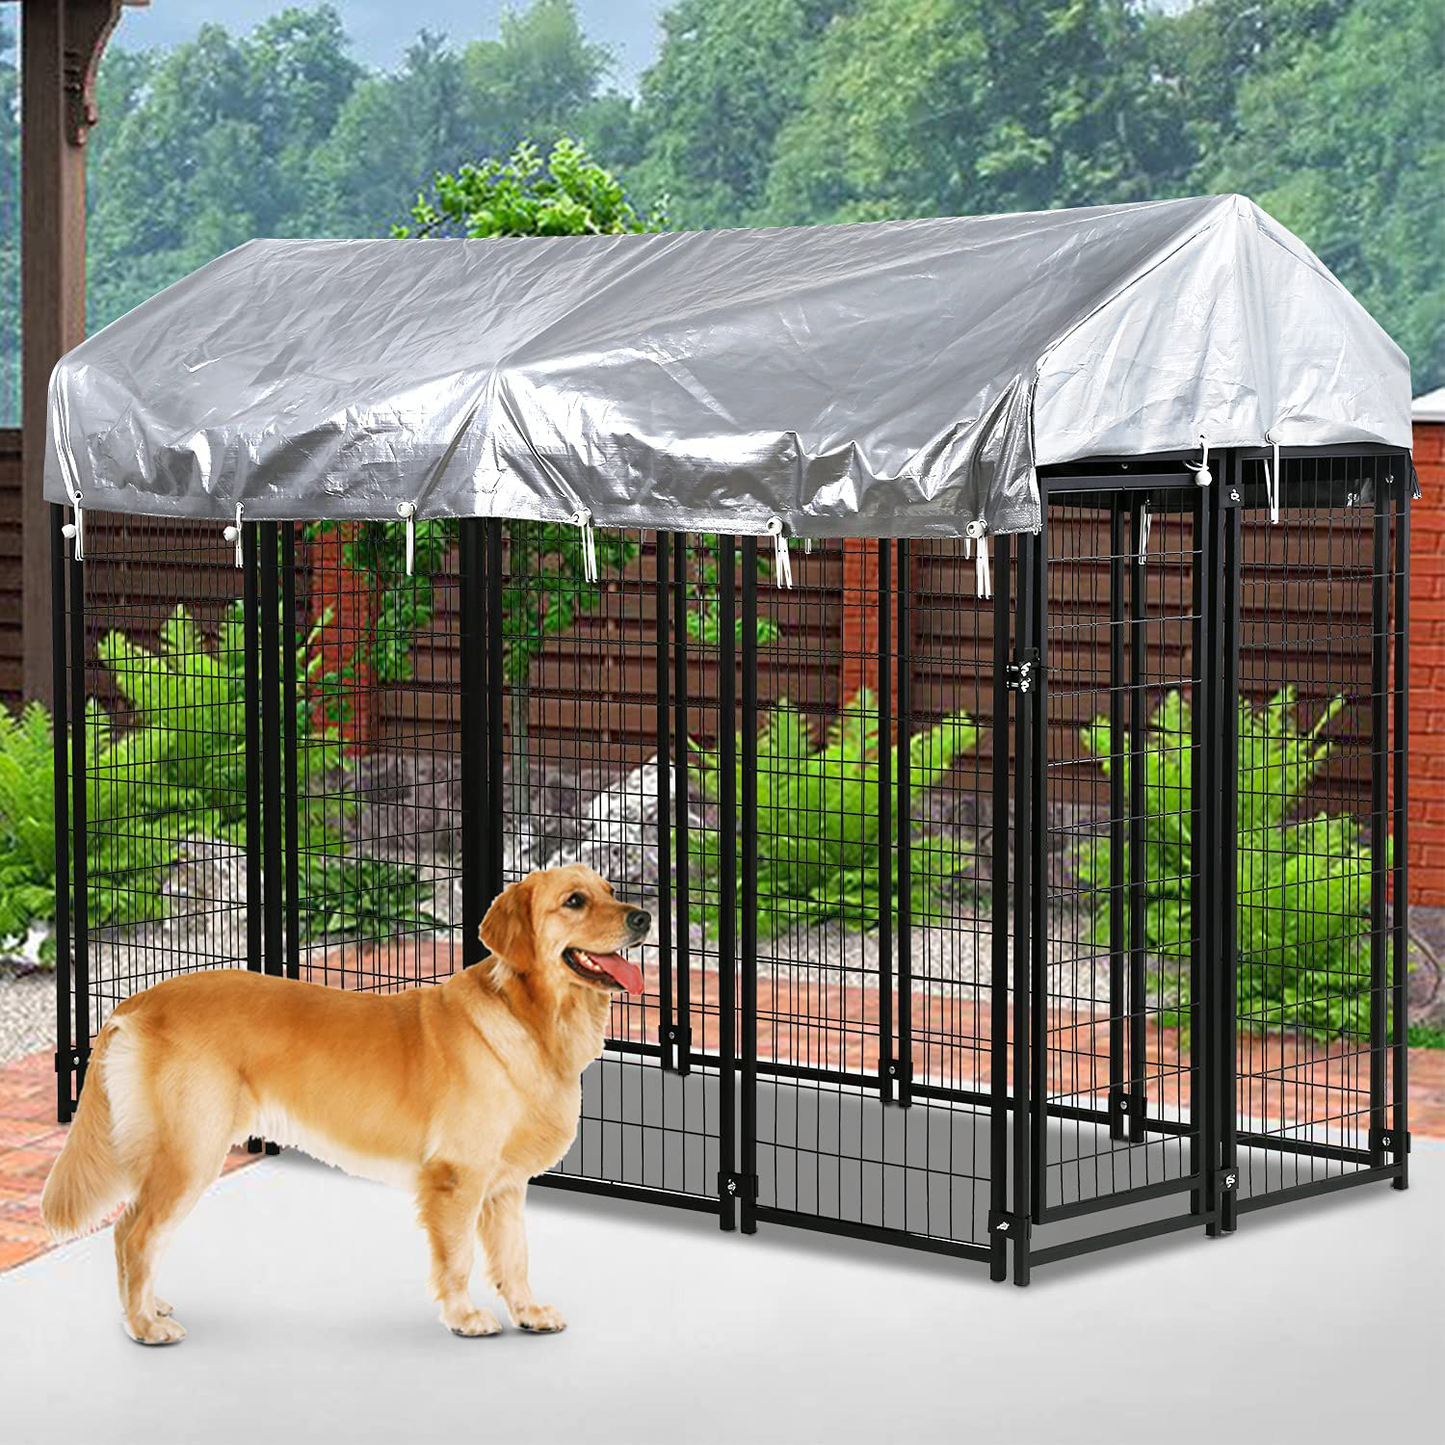 Heavy Duty Dog Crate Cage Kennel,Large Outdoor Waterproof Dog Yard Kennel Pet Playpen House,8' X 4' X 6' Wire Metal Pet Play Pen Crates Cage Fence W/ UV Protection Shade Cover & Roof & Secure Lock